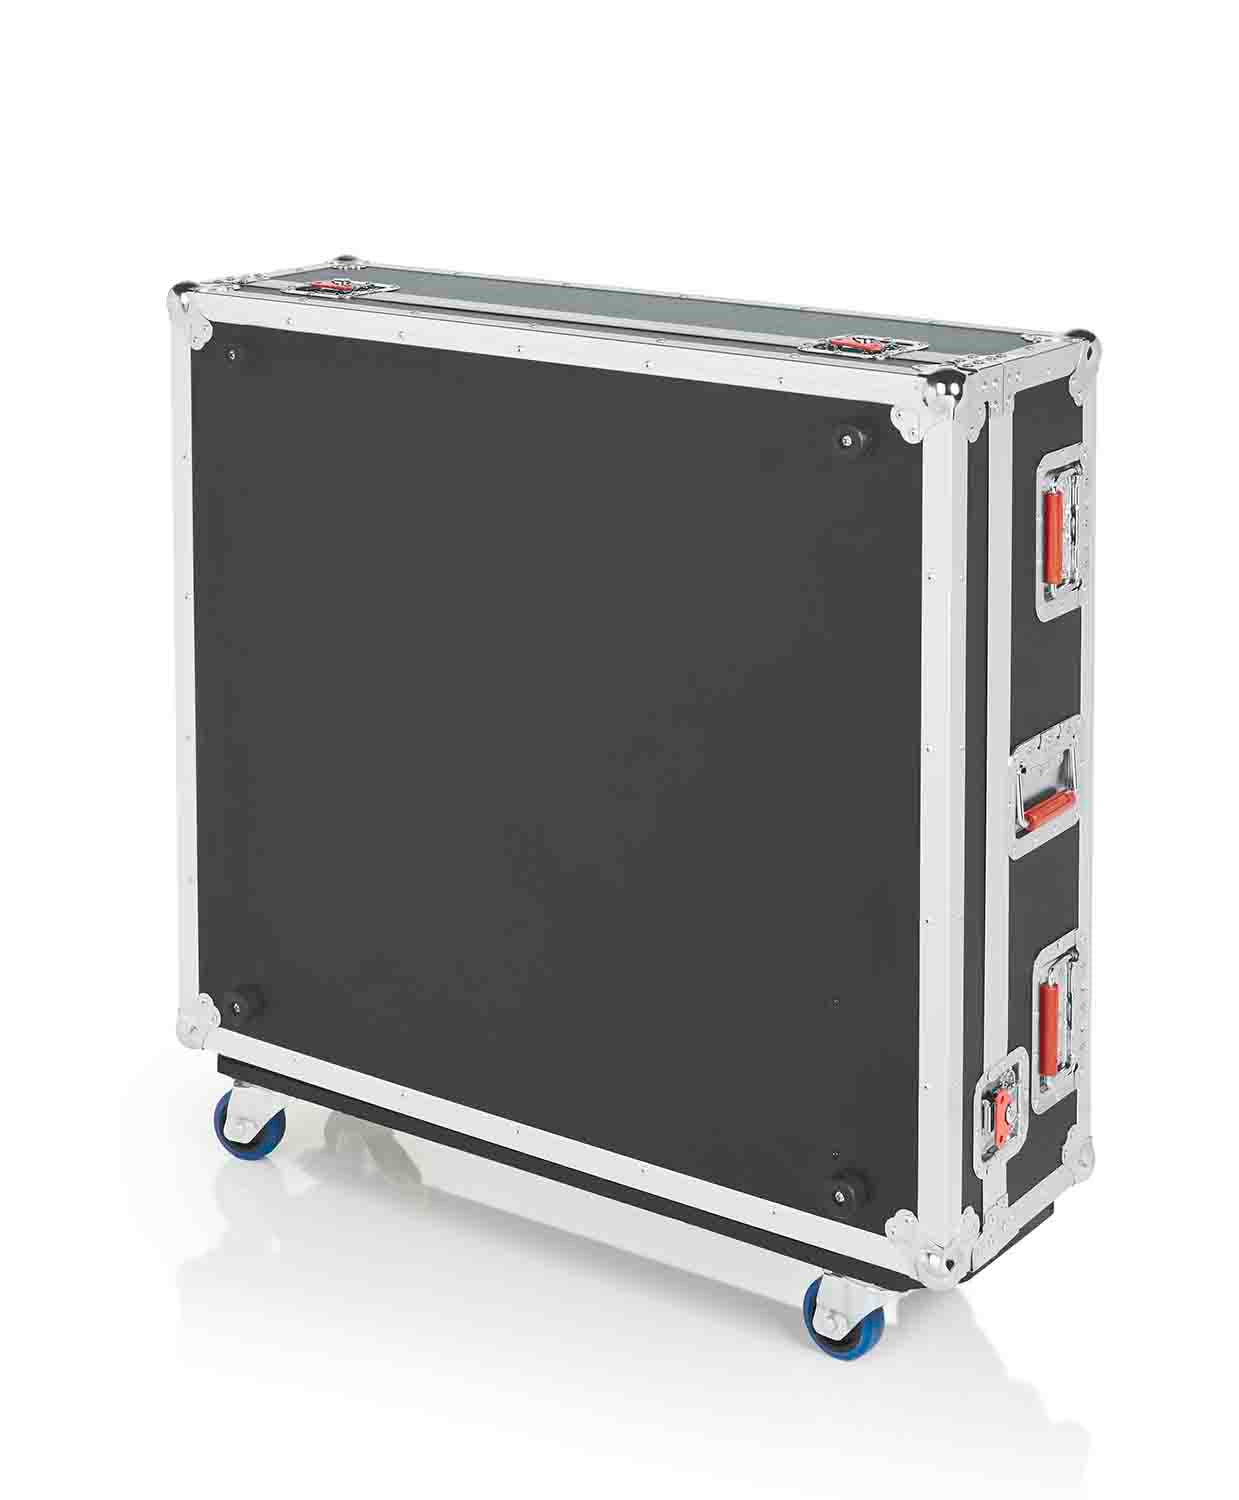 Gator Cases GTOURWING G-Tour Flight DJ Case for Behringer Wing Mixer with Casters and Doghouse - Hollywood DJ